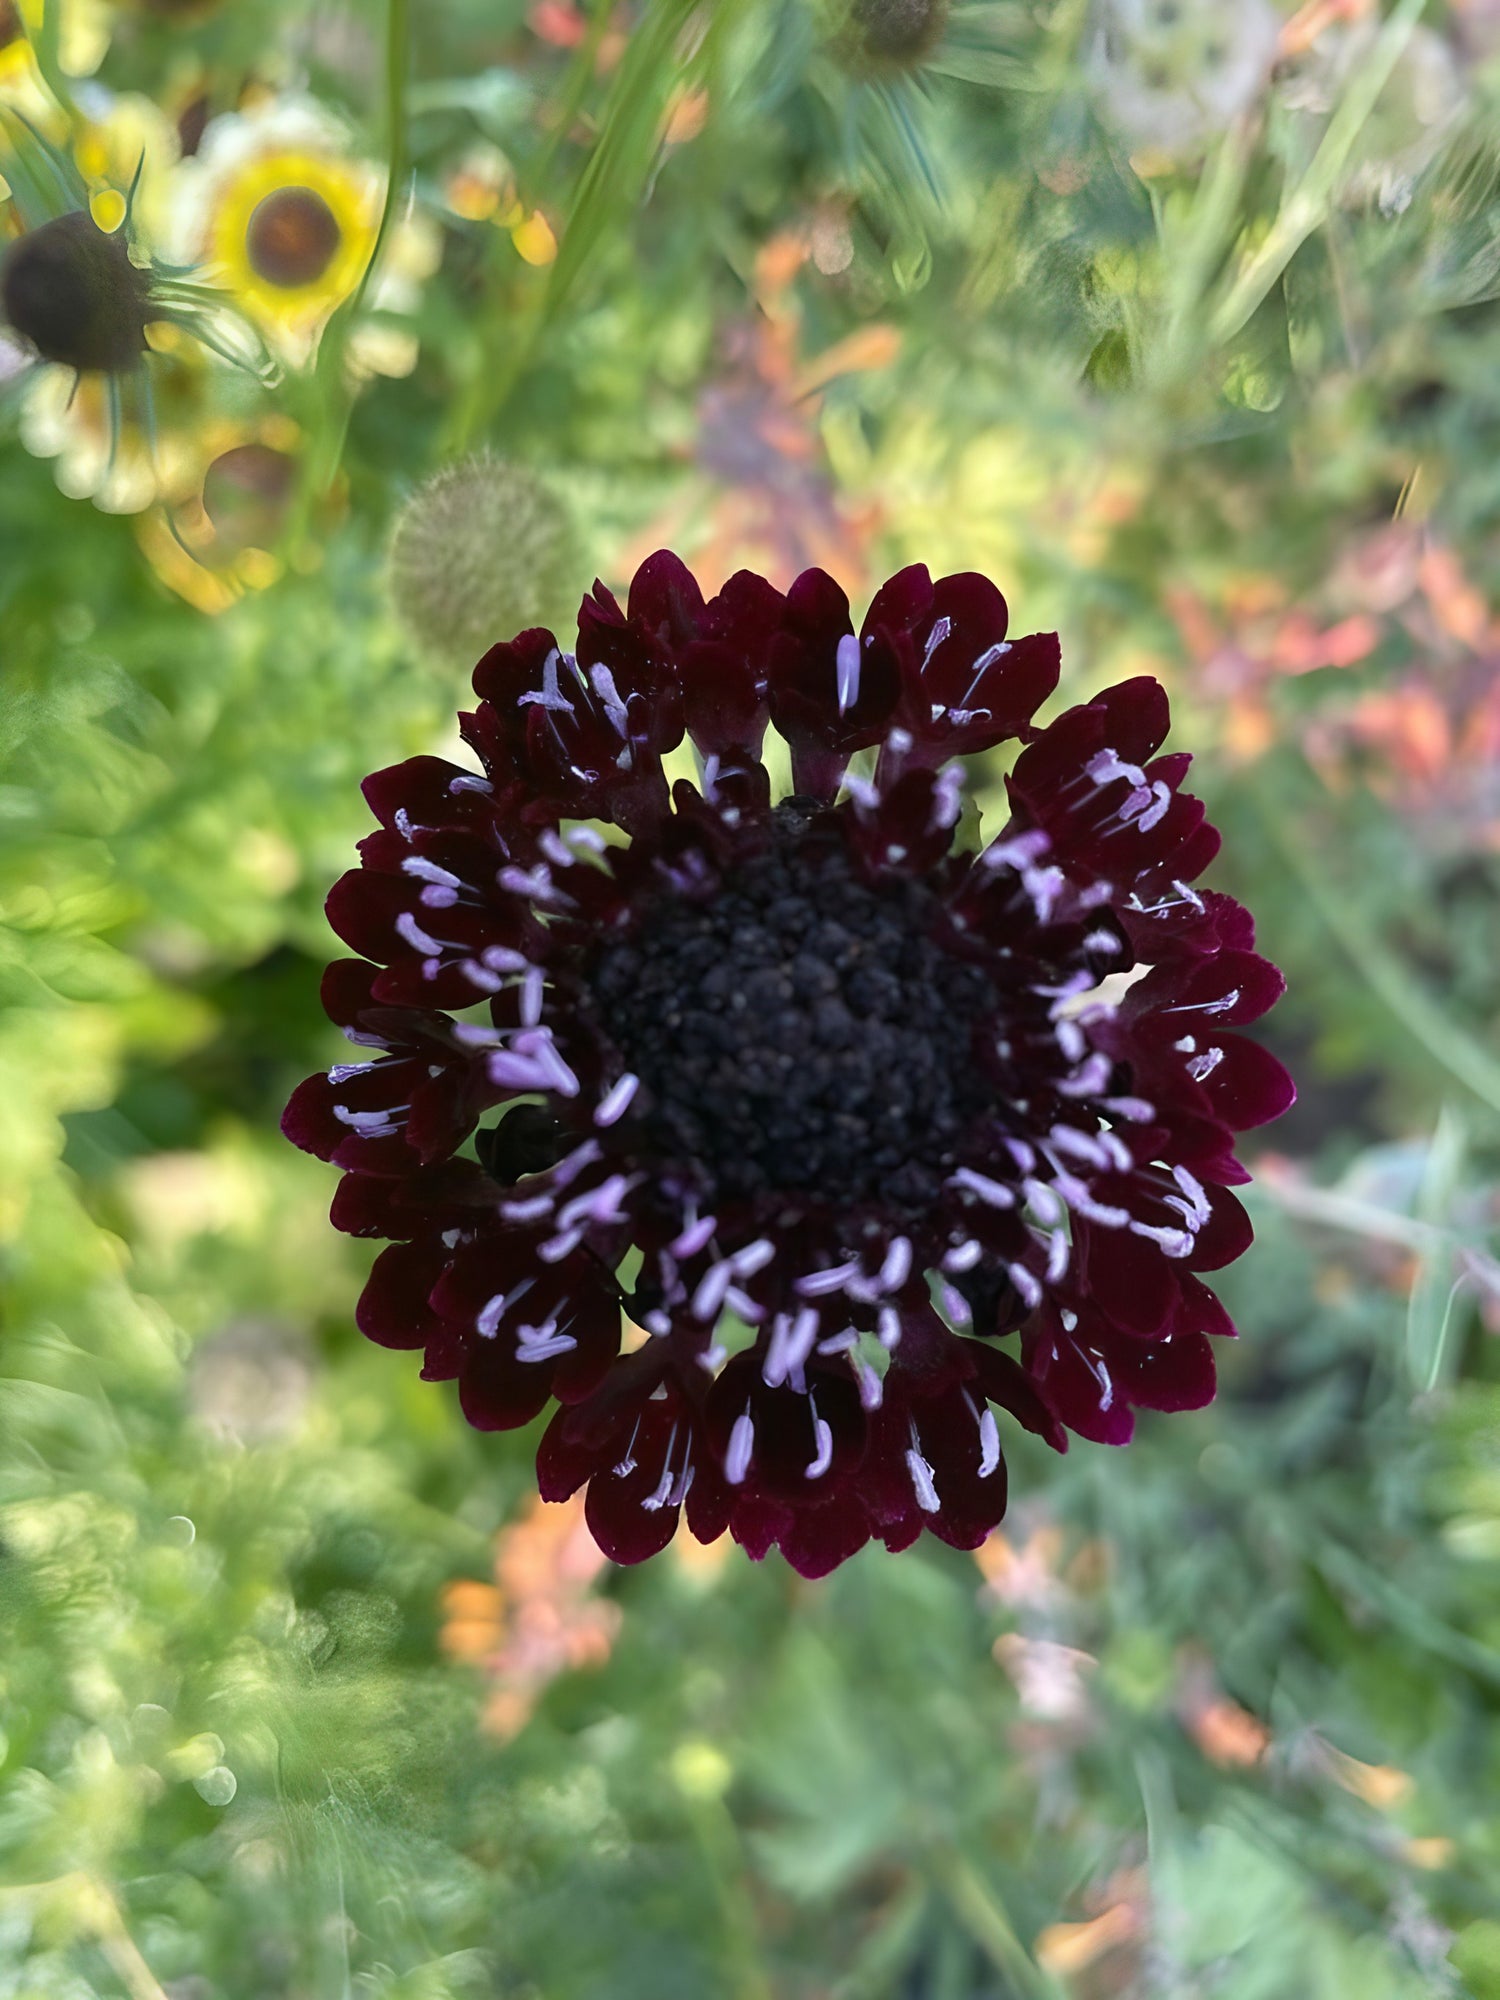 Detail of a Scabious Black Knight flower with white at the petal bases